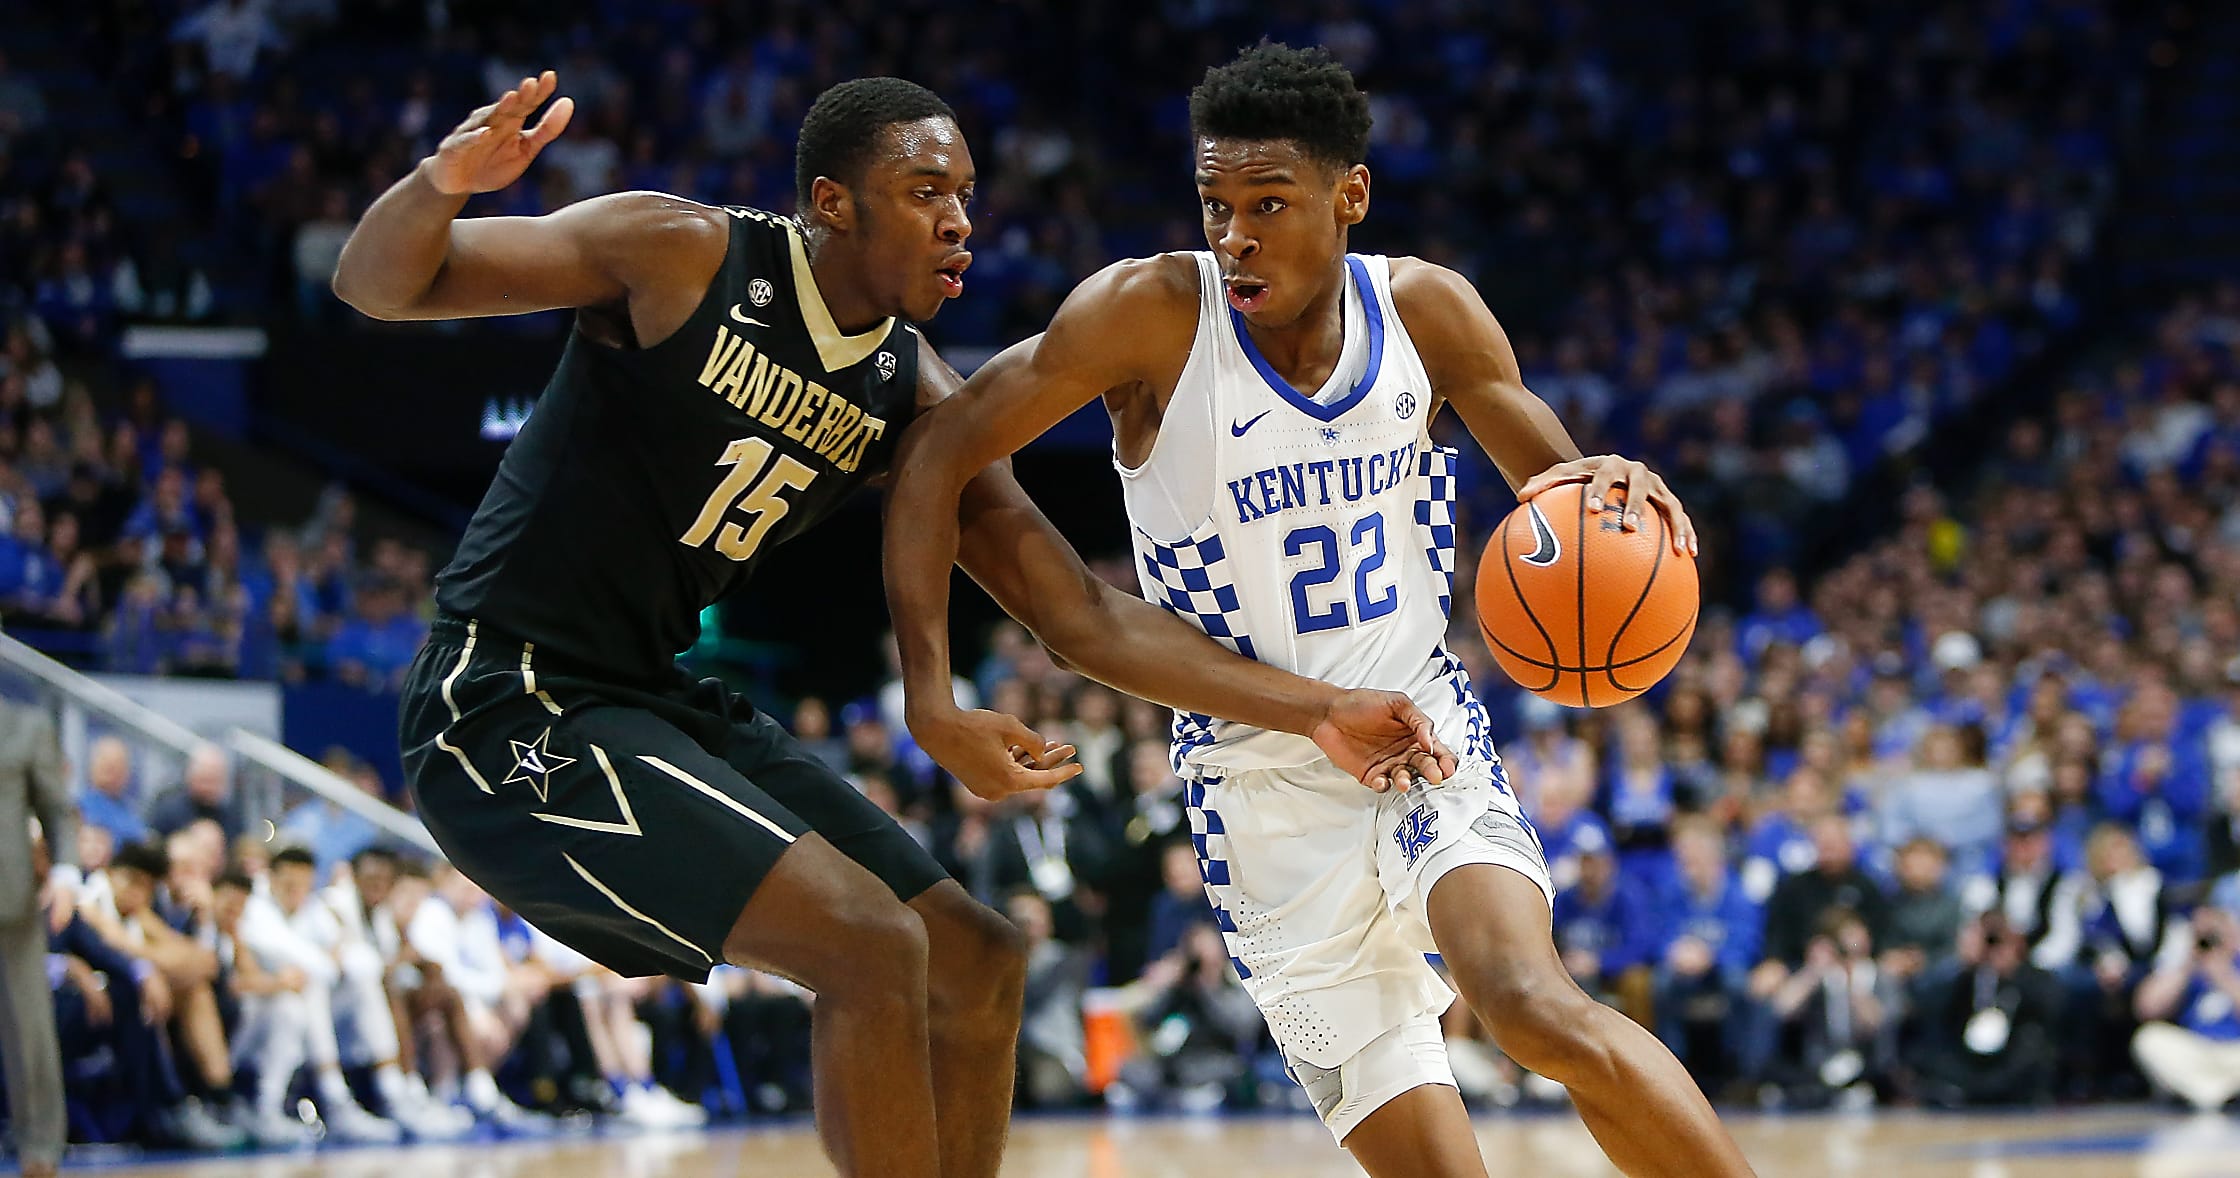 Shai Gilgeous-Alexander emerging as one of Kentucky's top pro prospects | Zagsblog